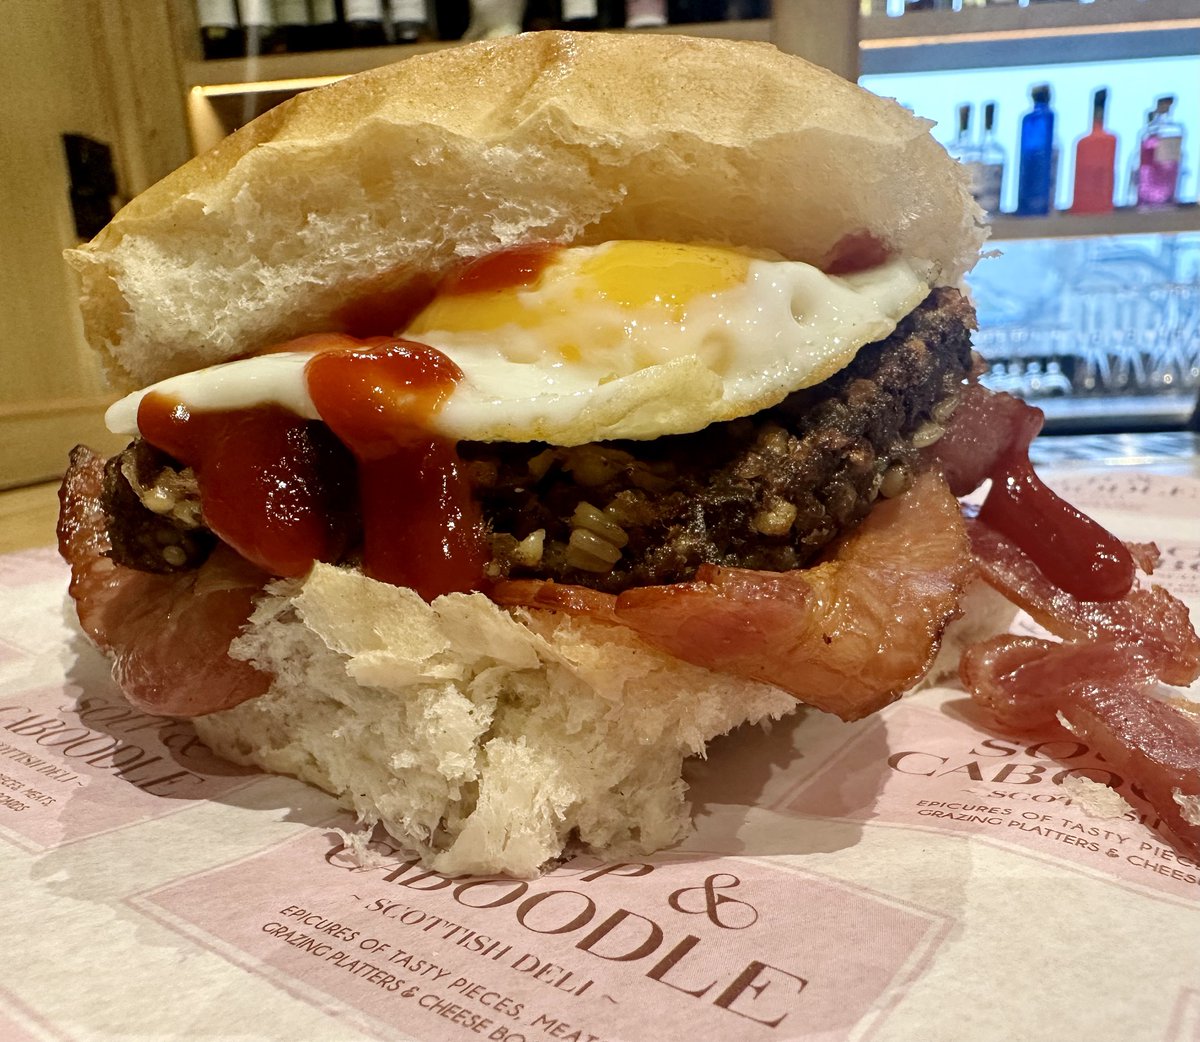 Remember we're open from 9am #everyday 🏴󠁧󠁢󠁳󠁣󠁴󠁿🍳🥓
Pick up a #breakfastroll over the #bankholidayweekend 📷@ £3.95 Choice of: Bacon – Stornoway black pudding – Macsween haggis – Pork link sausage – Fried egg – Potato scone (Add additional item £1.95)
soupandcaboodle.com/menu/ 
#EdinEats